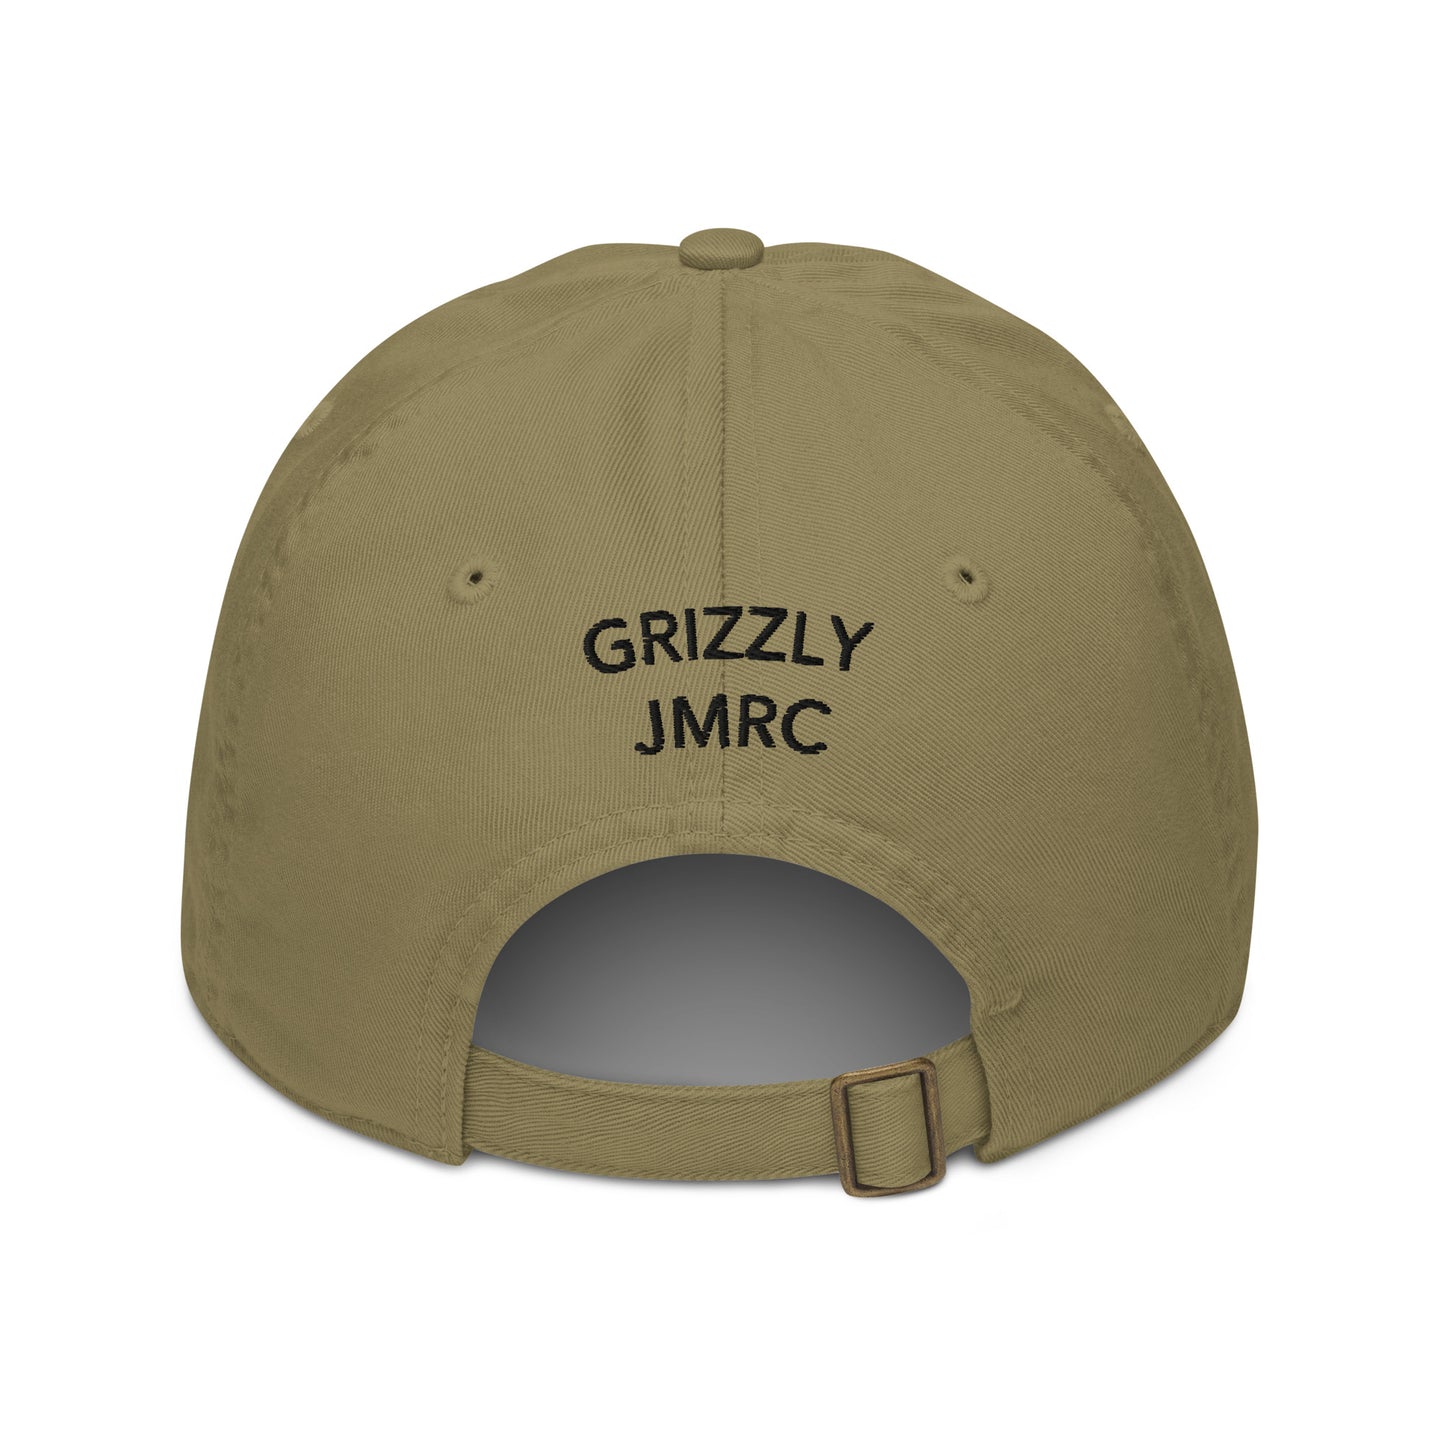 Grizzly Ball Cap